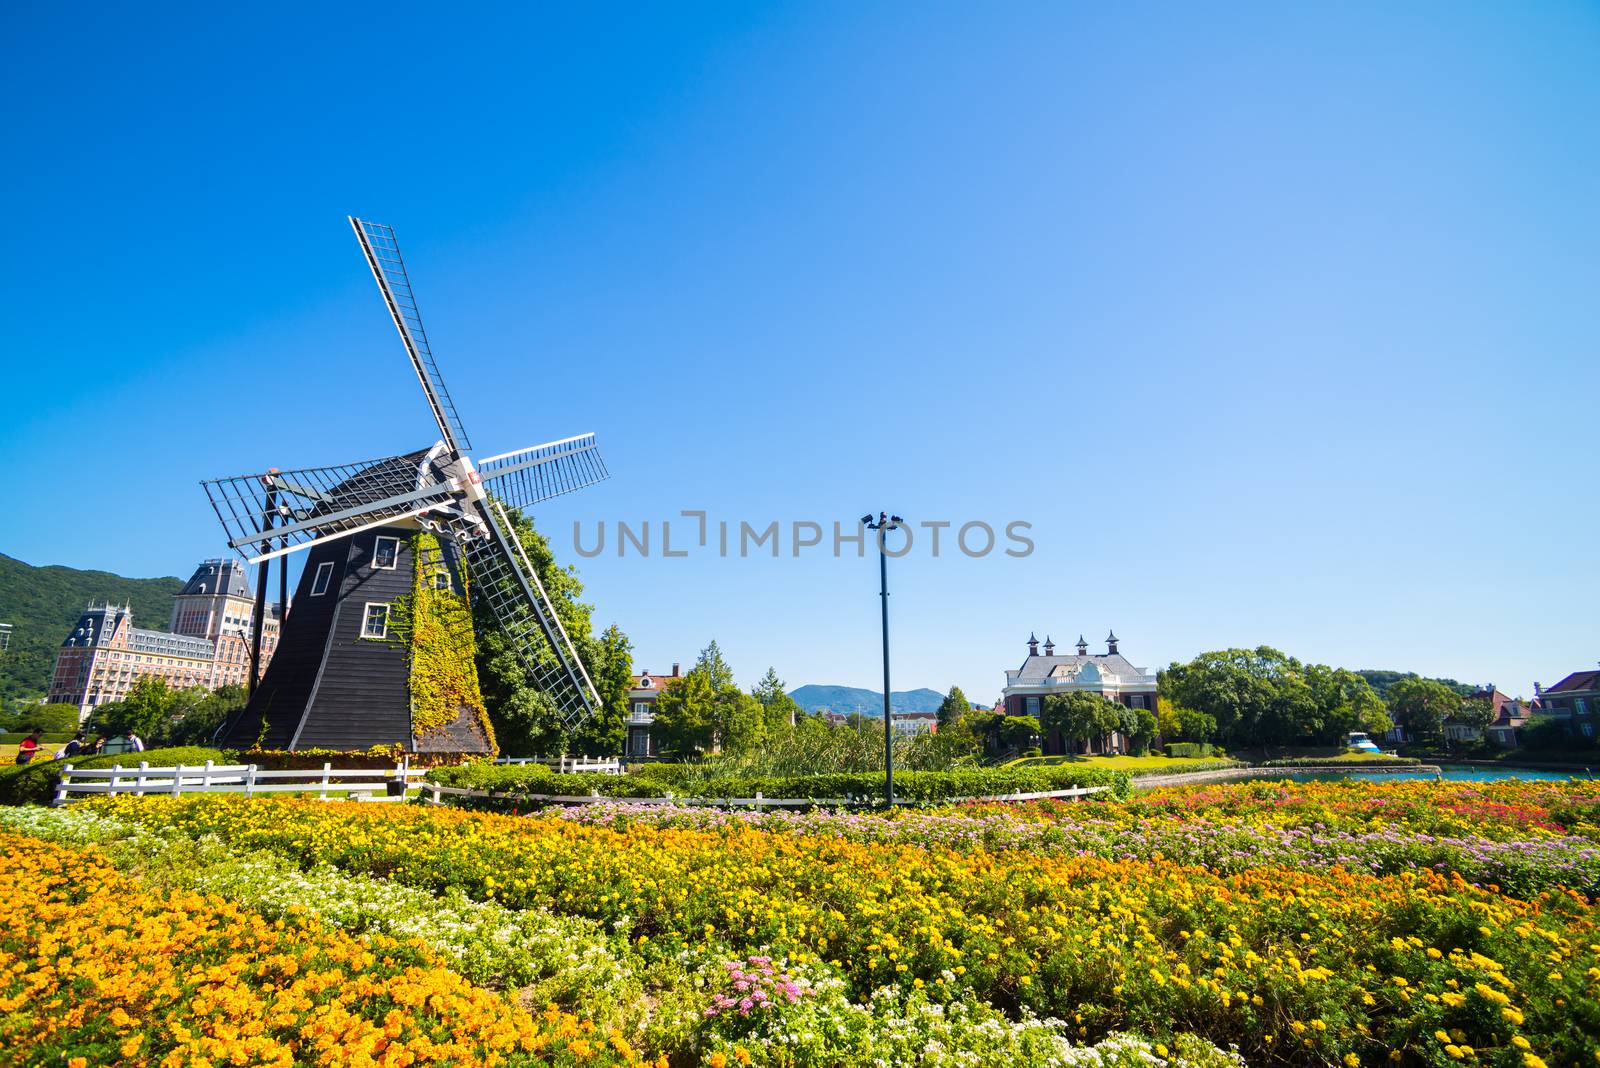 Windmill at Huis Ten Bosch stand in a bright and clear sky, Japan